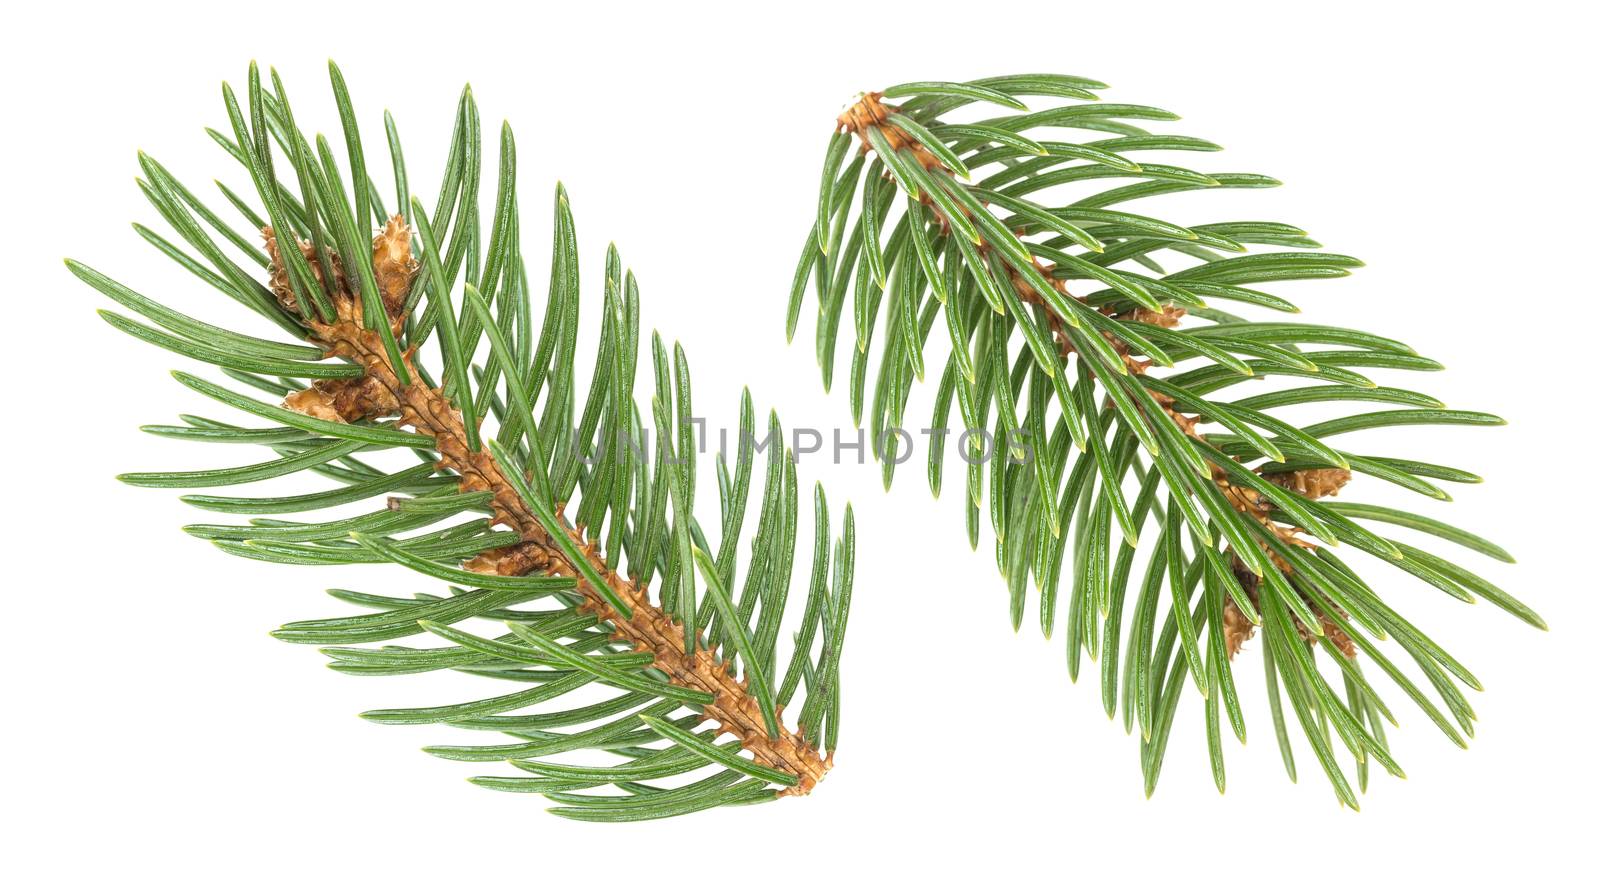 Fir tree branch isolated on white background with clipping path